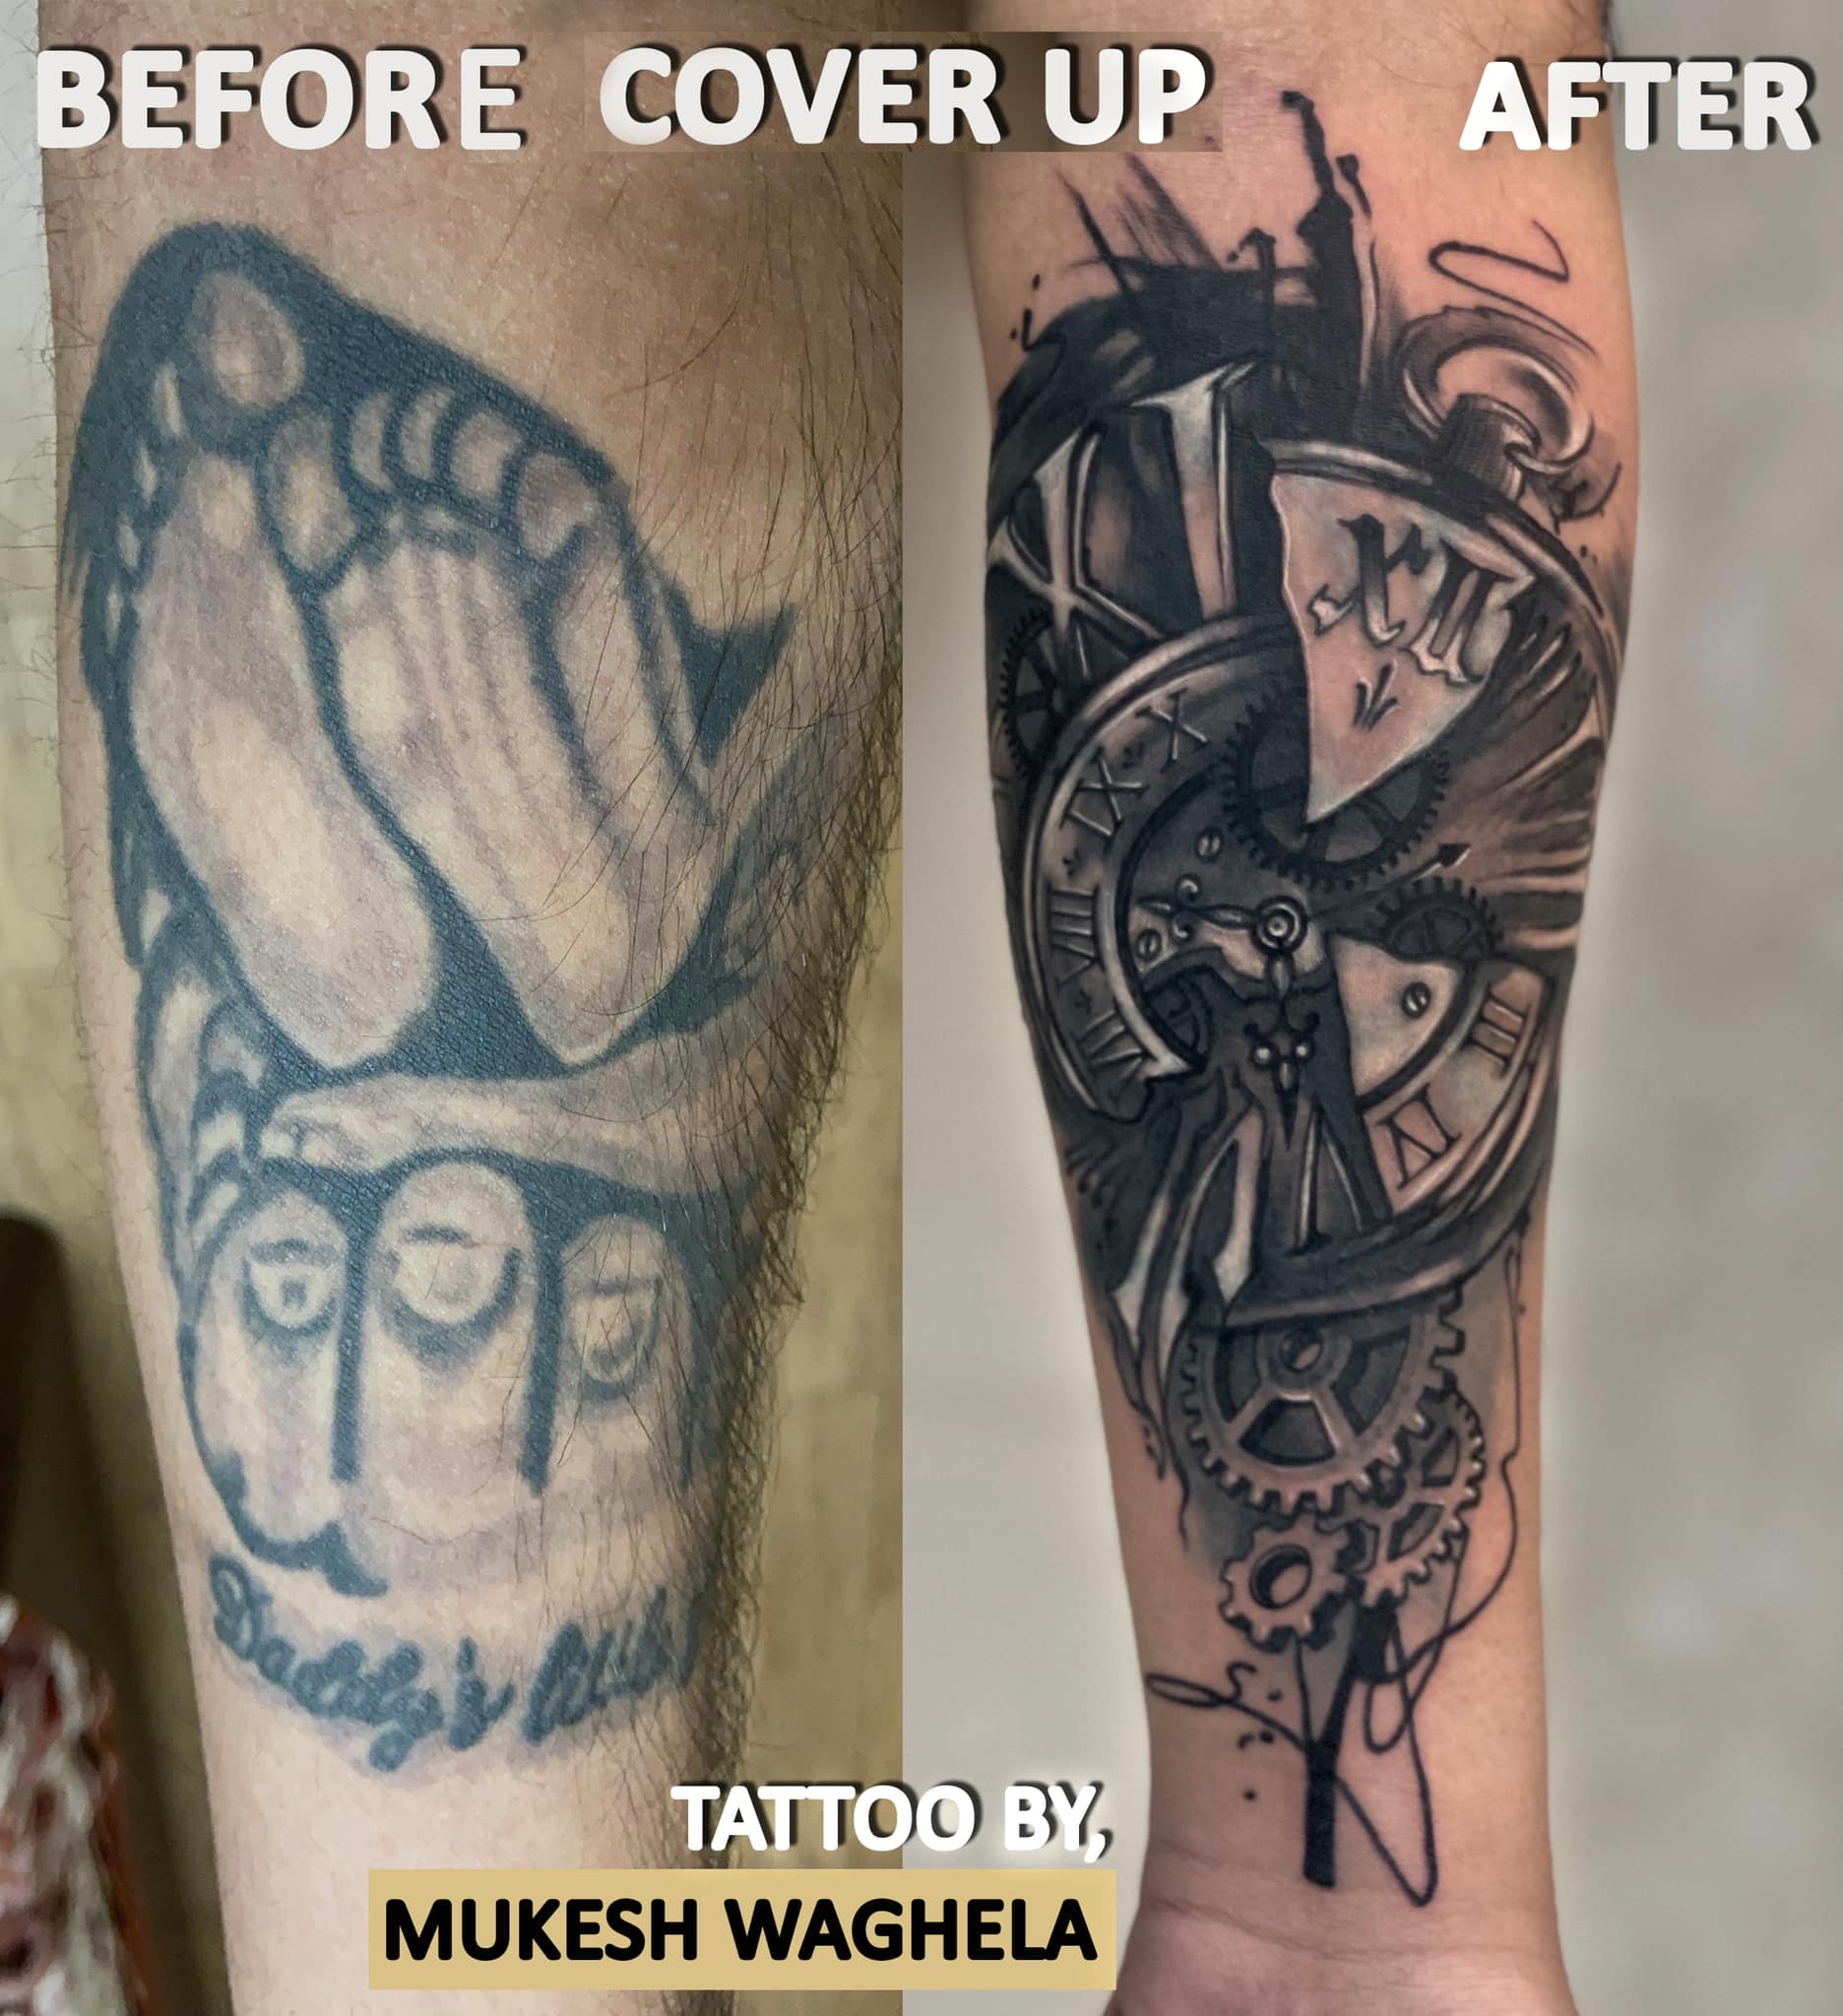 The top 10 coverup tattoo artists in Toronto